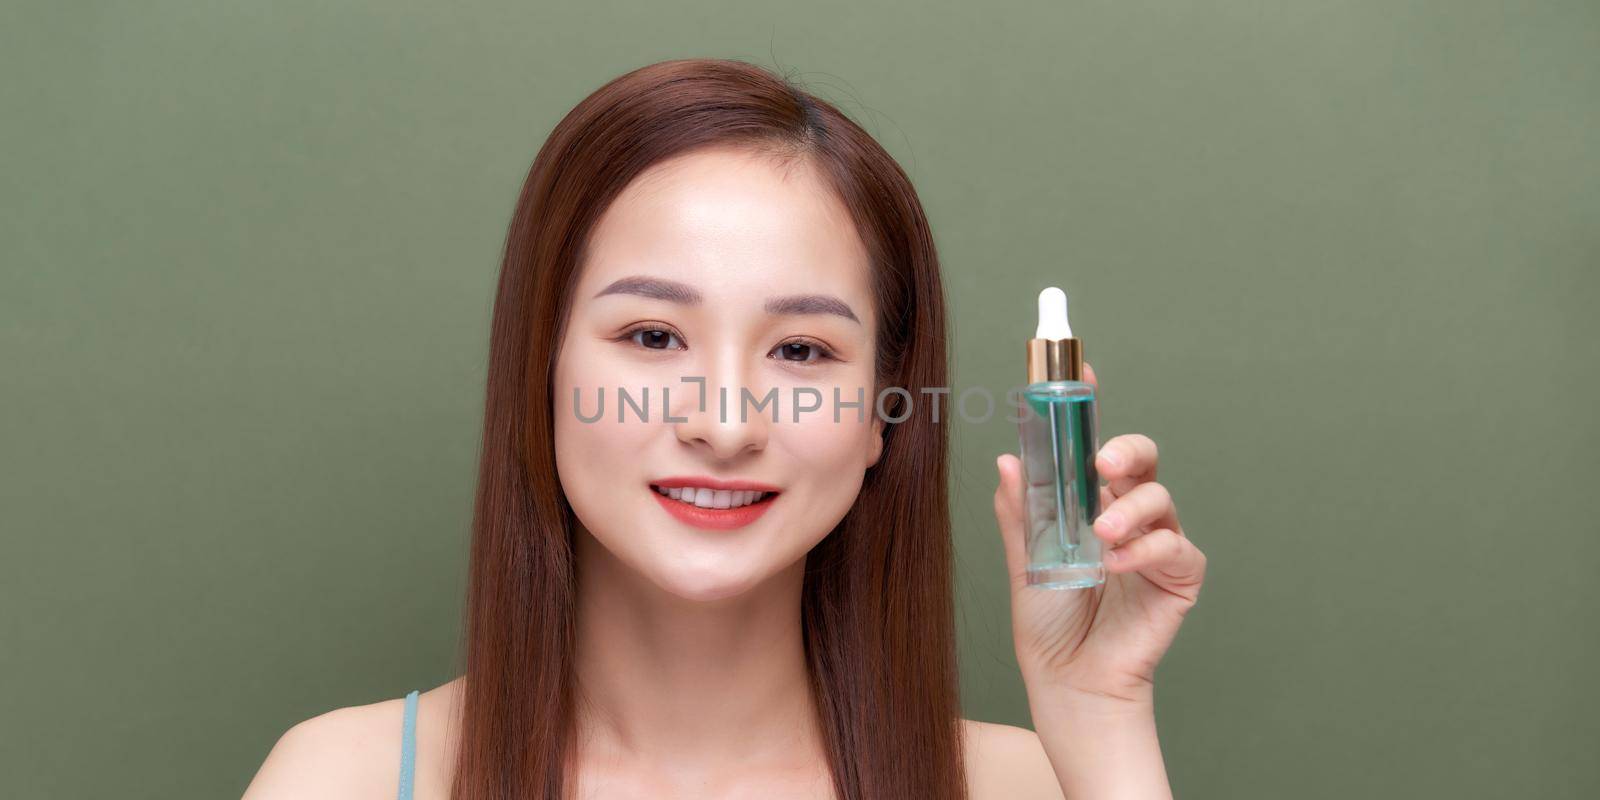 Smiling woman holding vitamin c serum near her face on green background by makidotvn